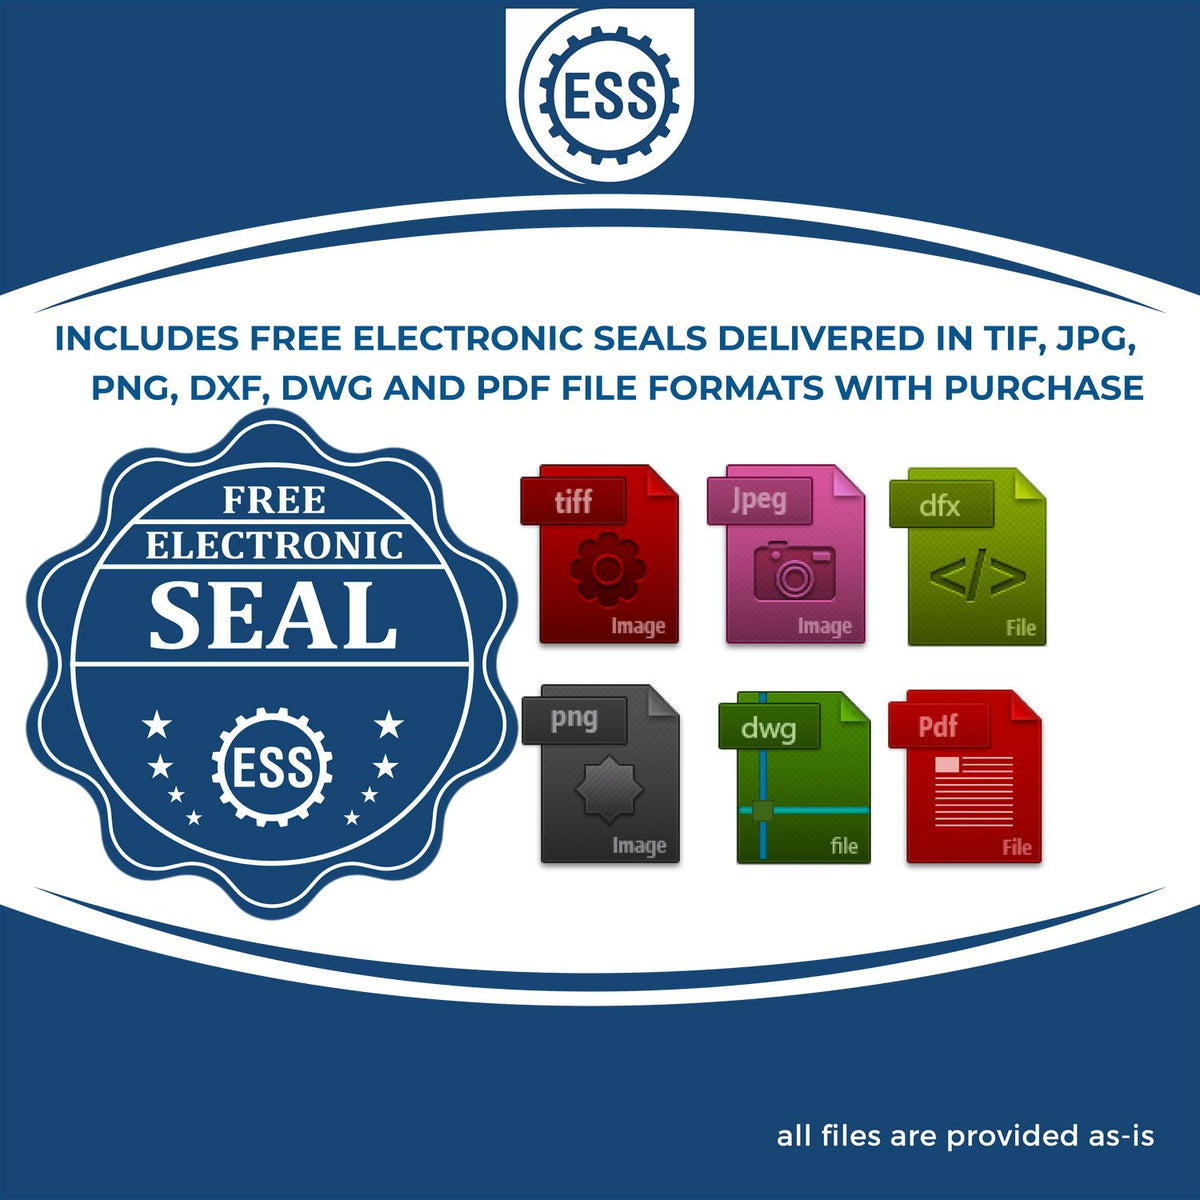 An infographic for the free electronic seal for the Long Reach Pennsylvania Geology Seal illustrating the different file type icons such as DXF, DWG, TIF, JPG and PNG.